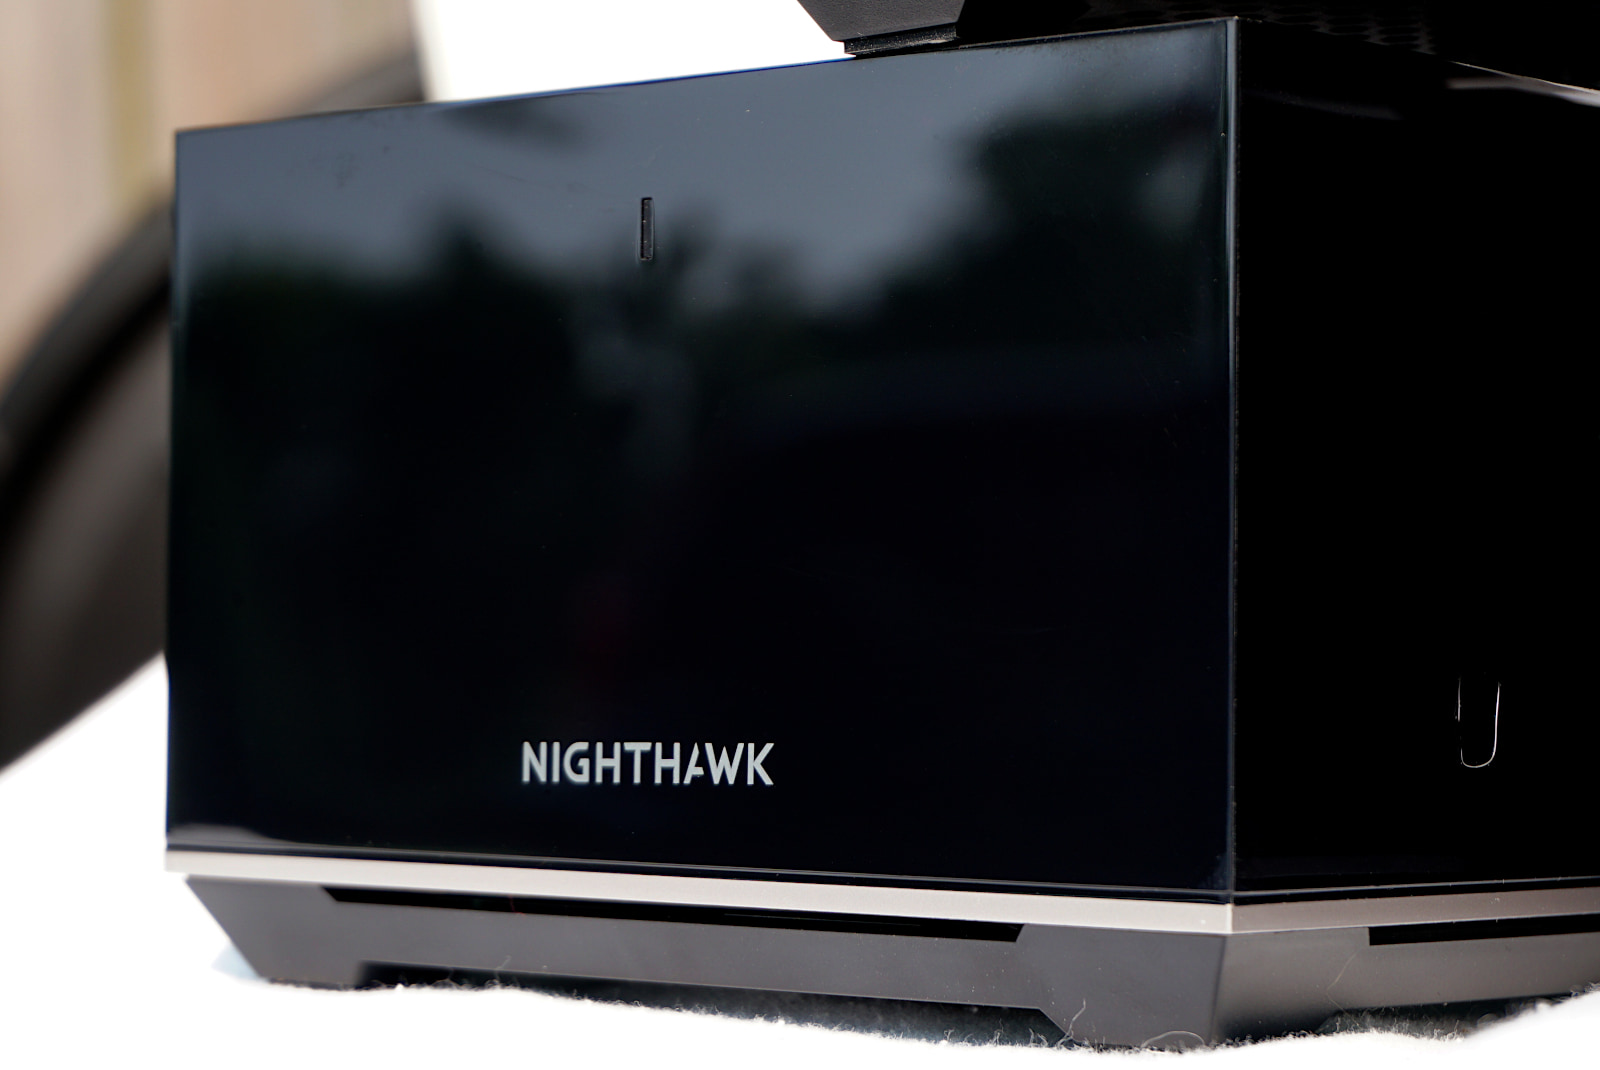 Front angle view of Nighthawk unit showing logo